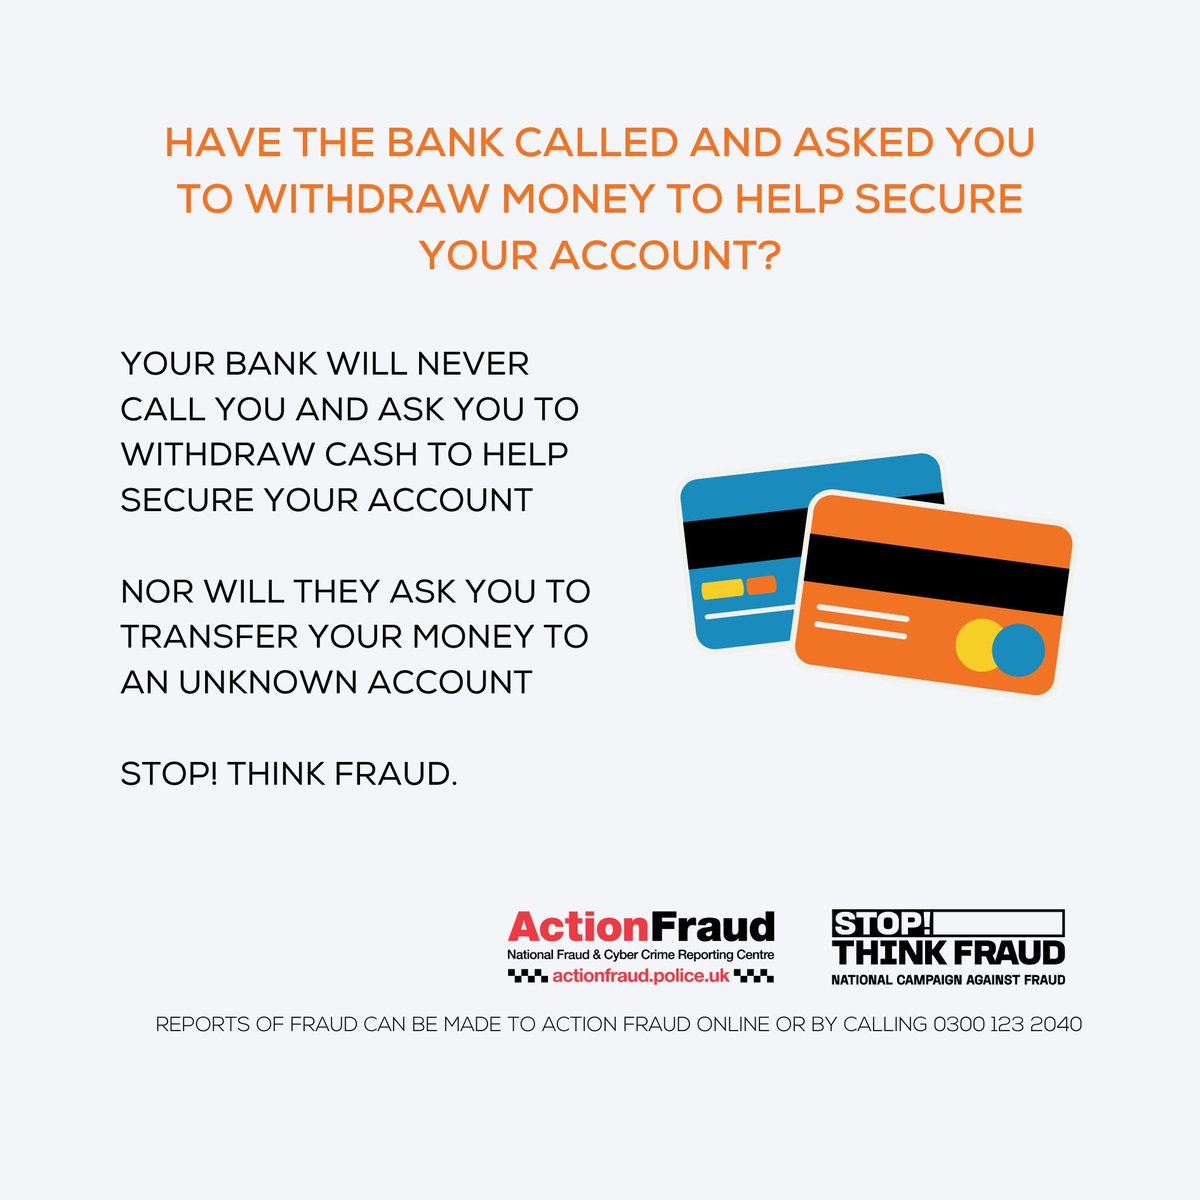 Your bank will never contact you and ask you to withdraw cash to help secure your account. This is a tell-tale sign of courier fraud. Dial 999 if this happens and even if you haven’t lost any money, also make a report to Action Fraud: orlo.uk/action-fraud_Y…